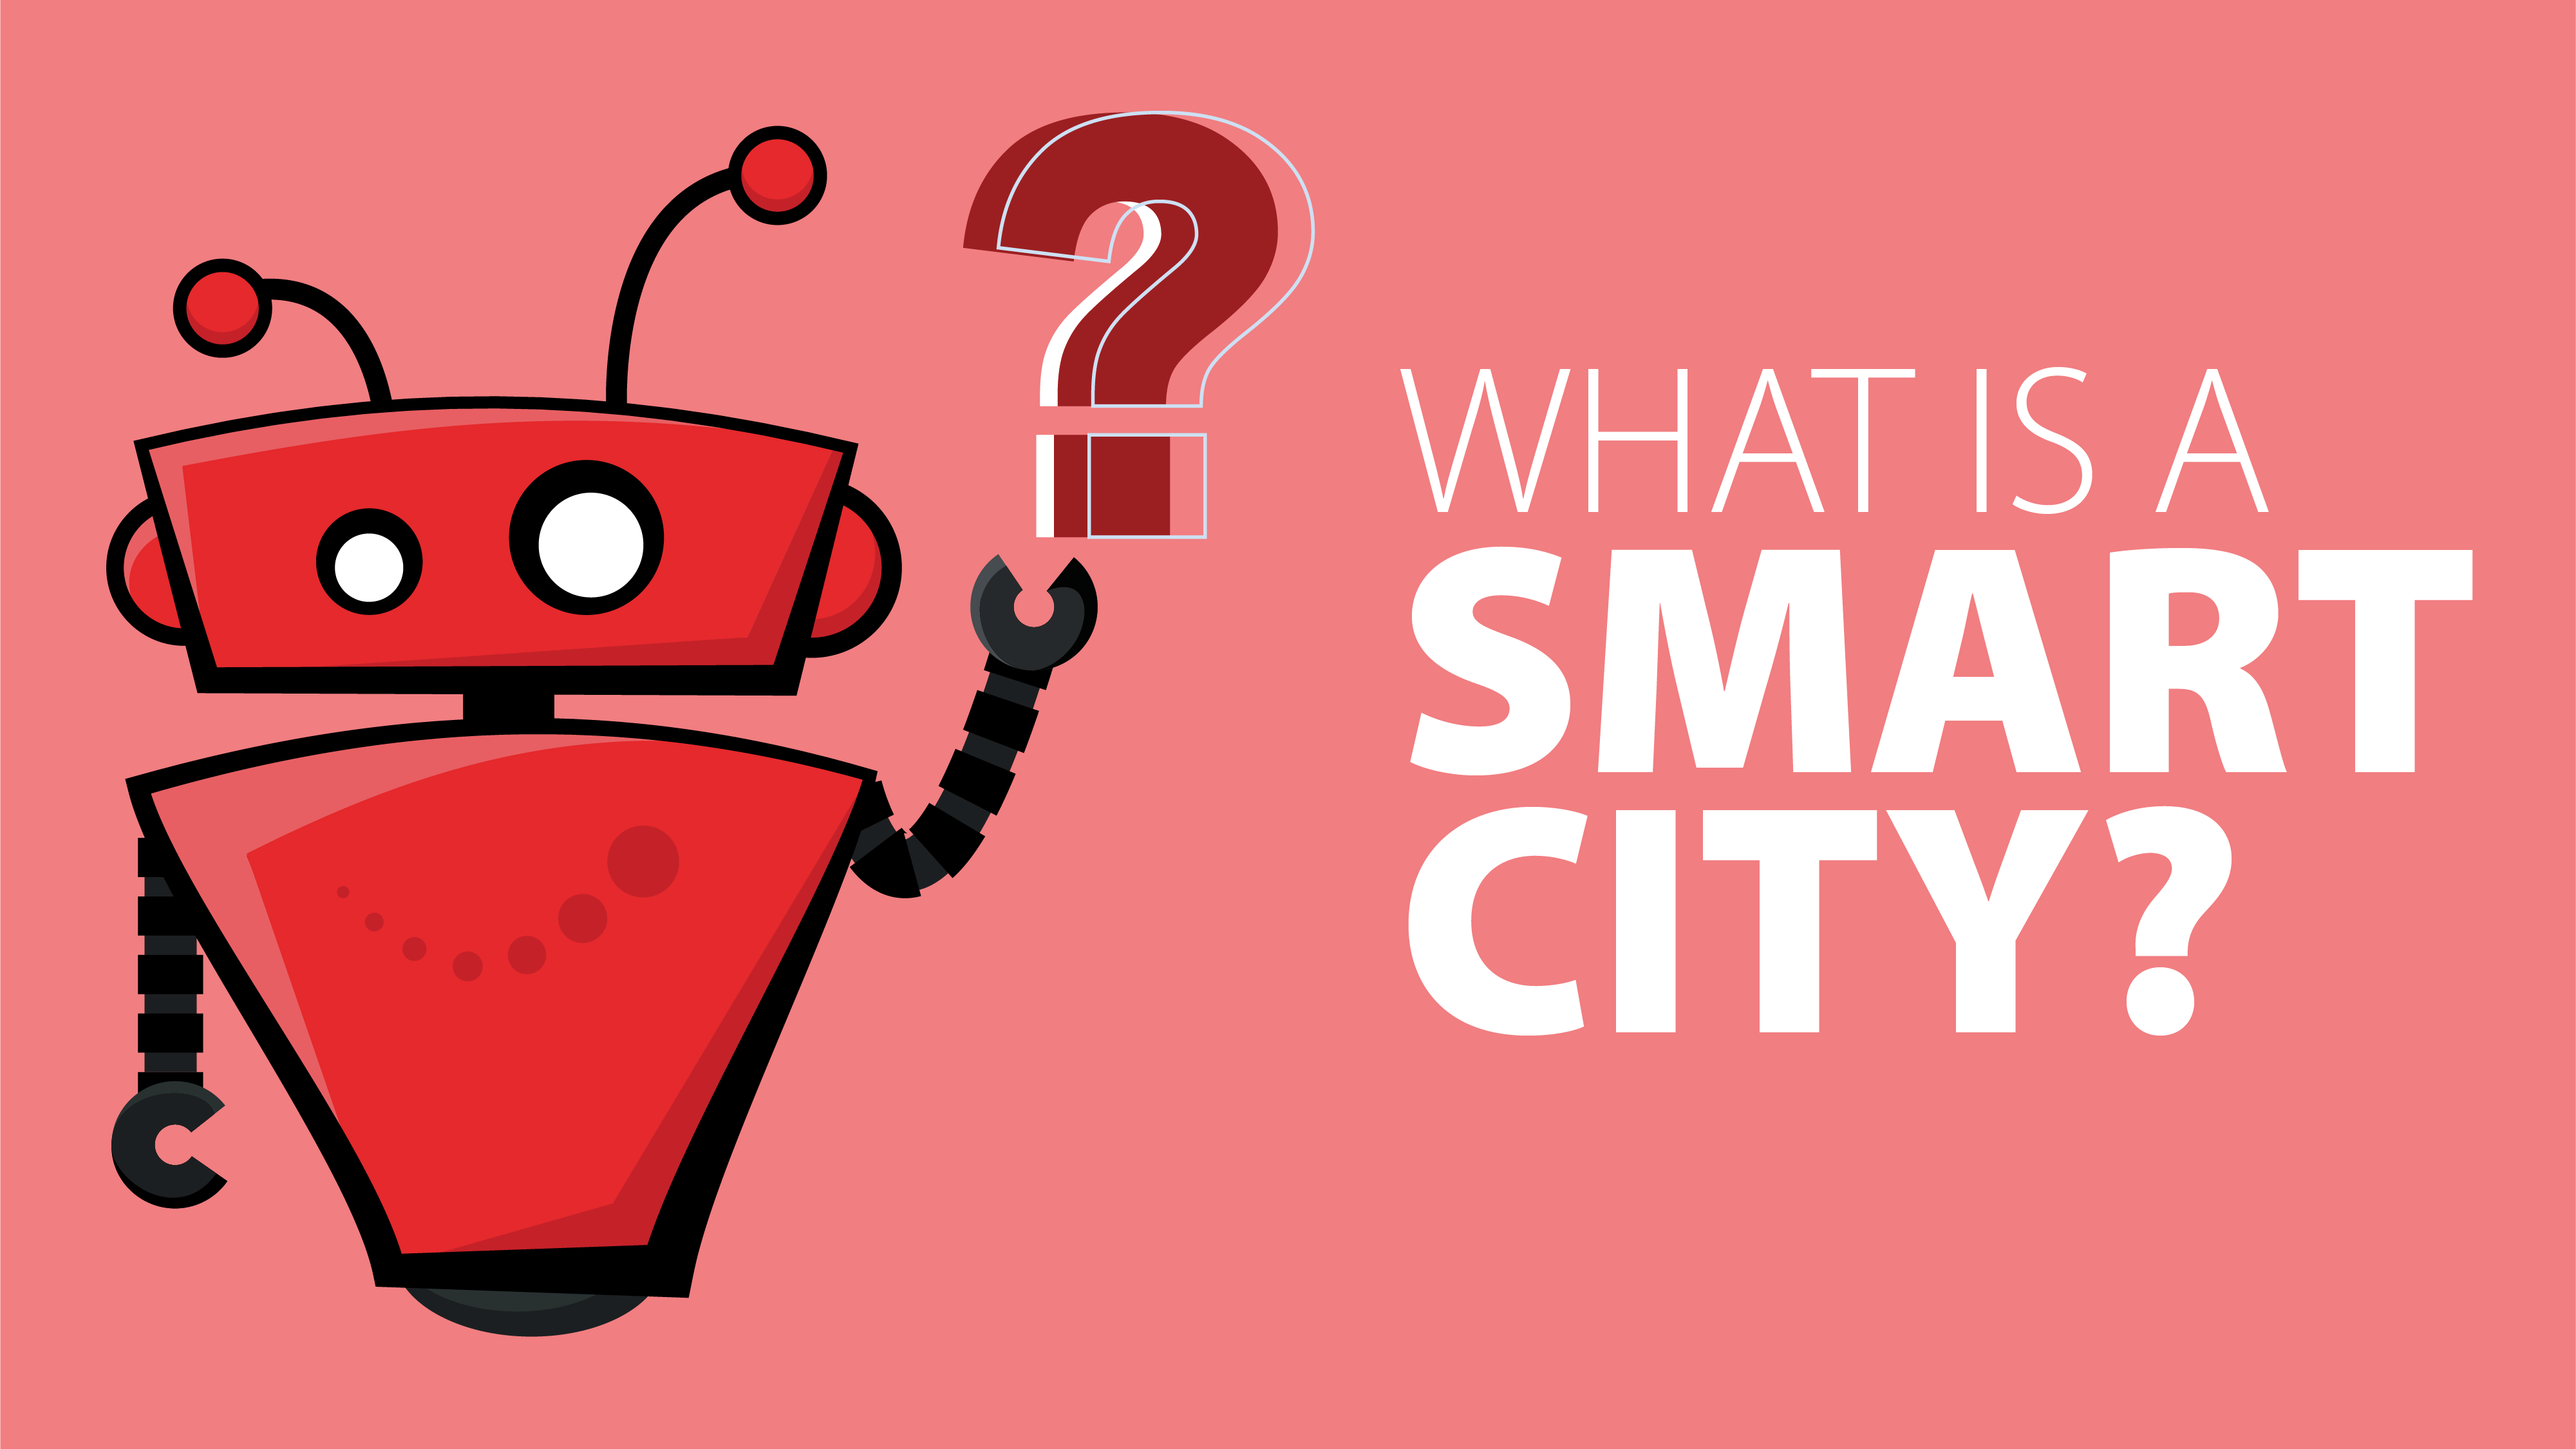 xBert robot holding a question mark and asking what is a smart city